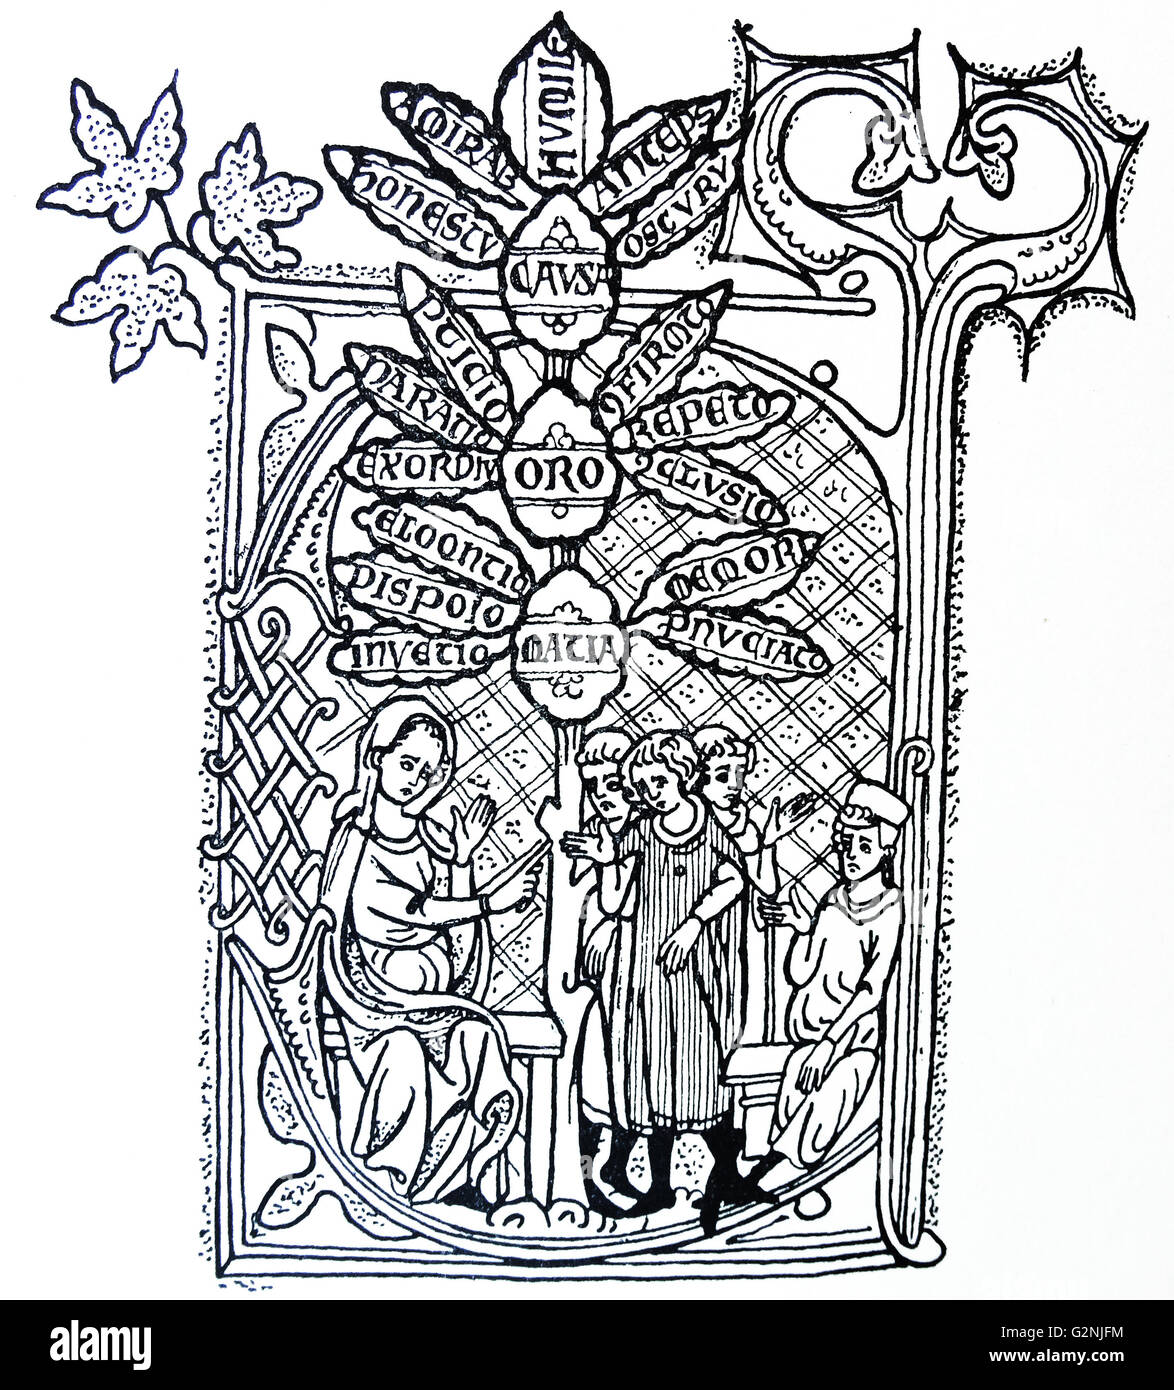 Illustration depicting the Rhetoric giving instruction. The stalk of the tree divides into the three main parts of Rhetoric- 'Causa', 'Oratio' and 'Material', while the leaves symbolise the sub-divisions of each part. Dated 12th Century Stock Photo